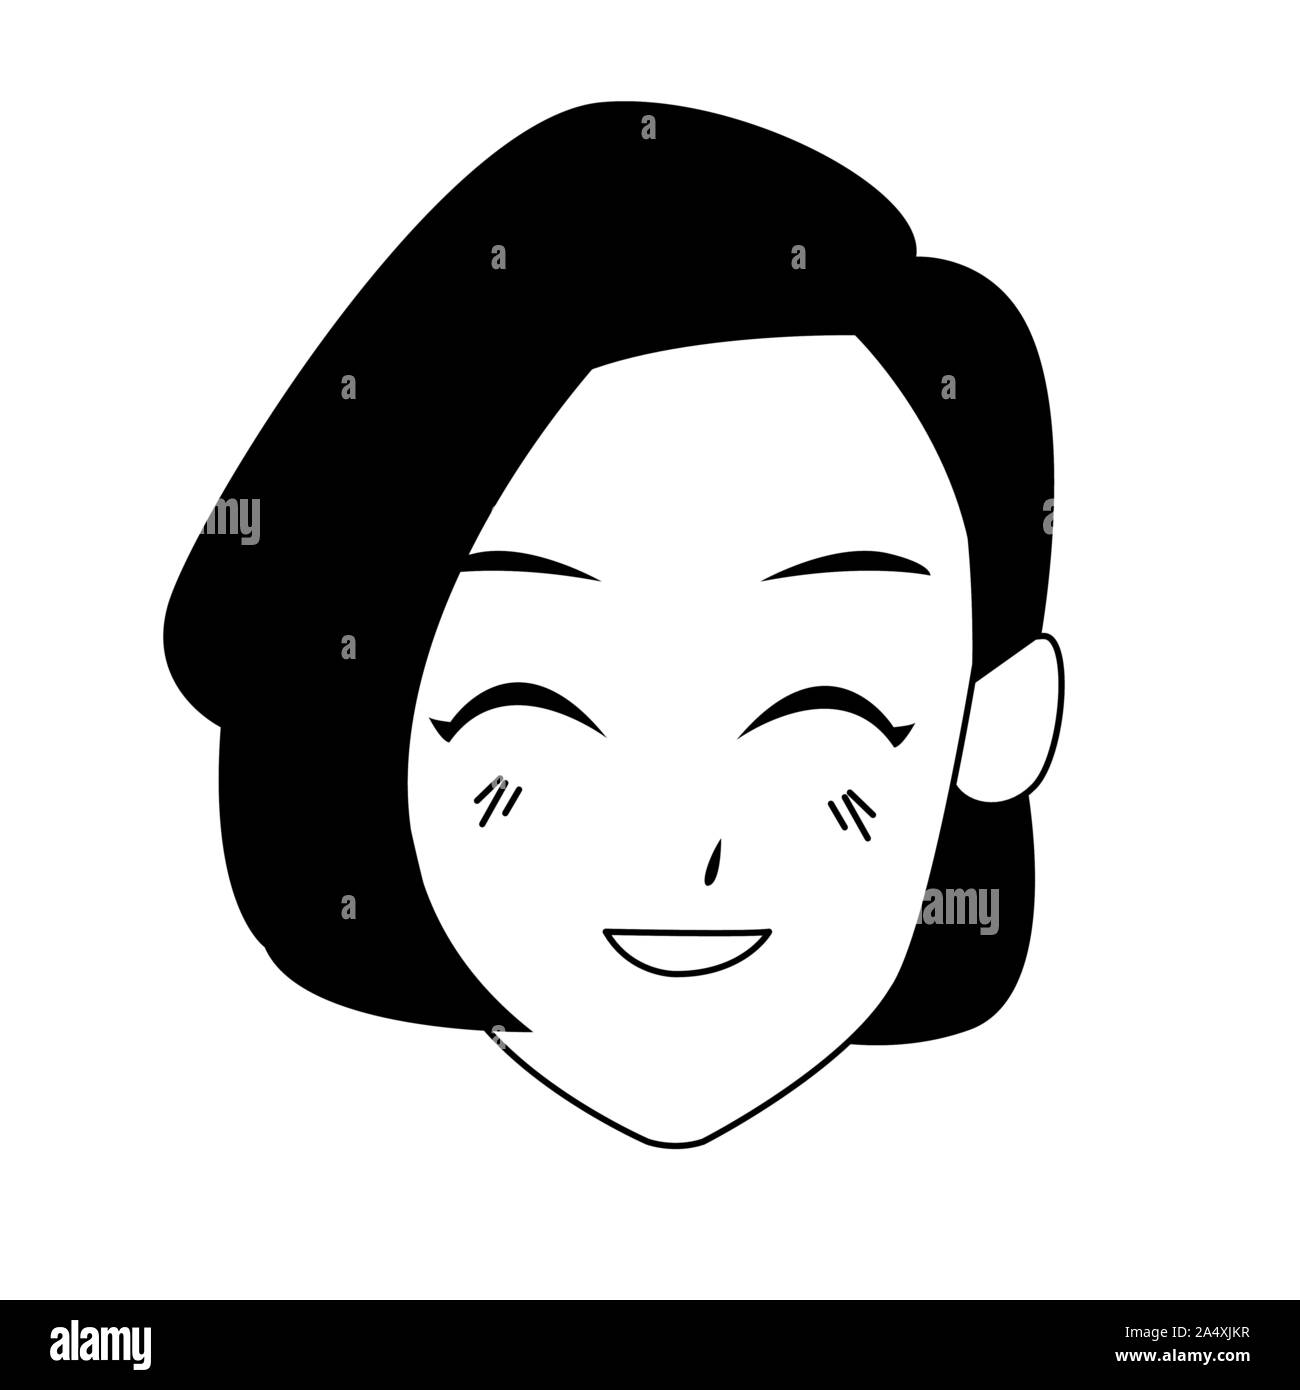 old woman smiling cartoon icon Stock Vector